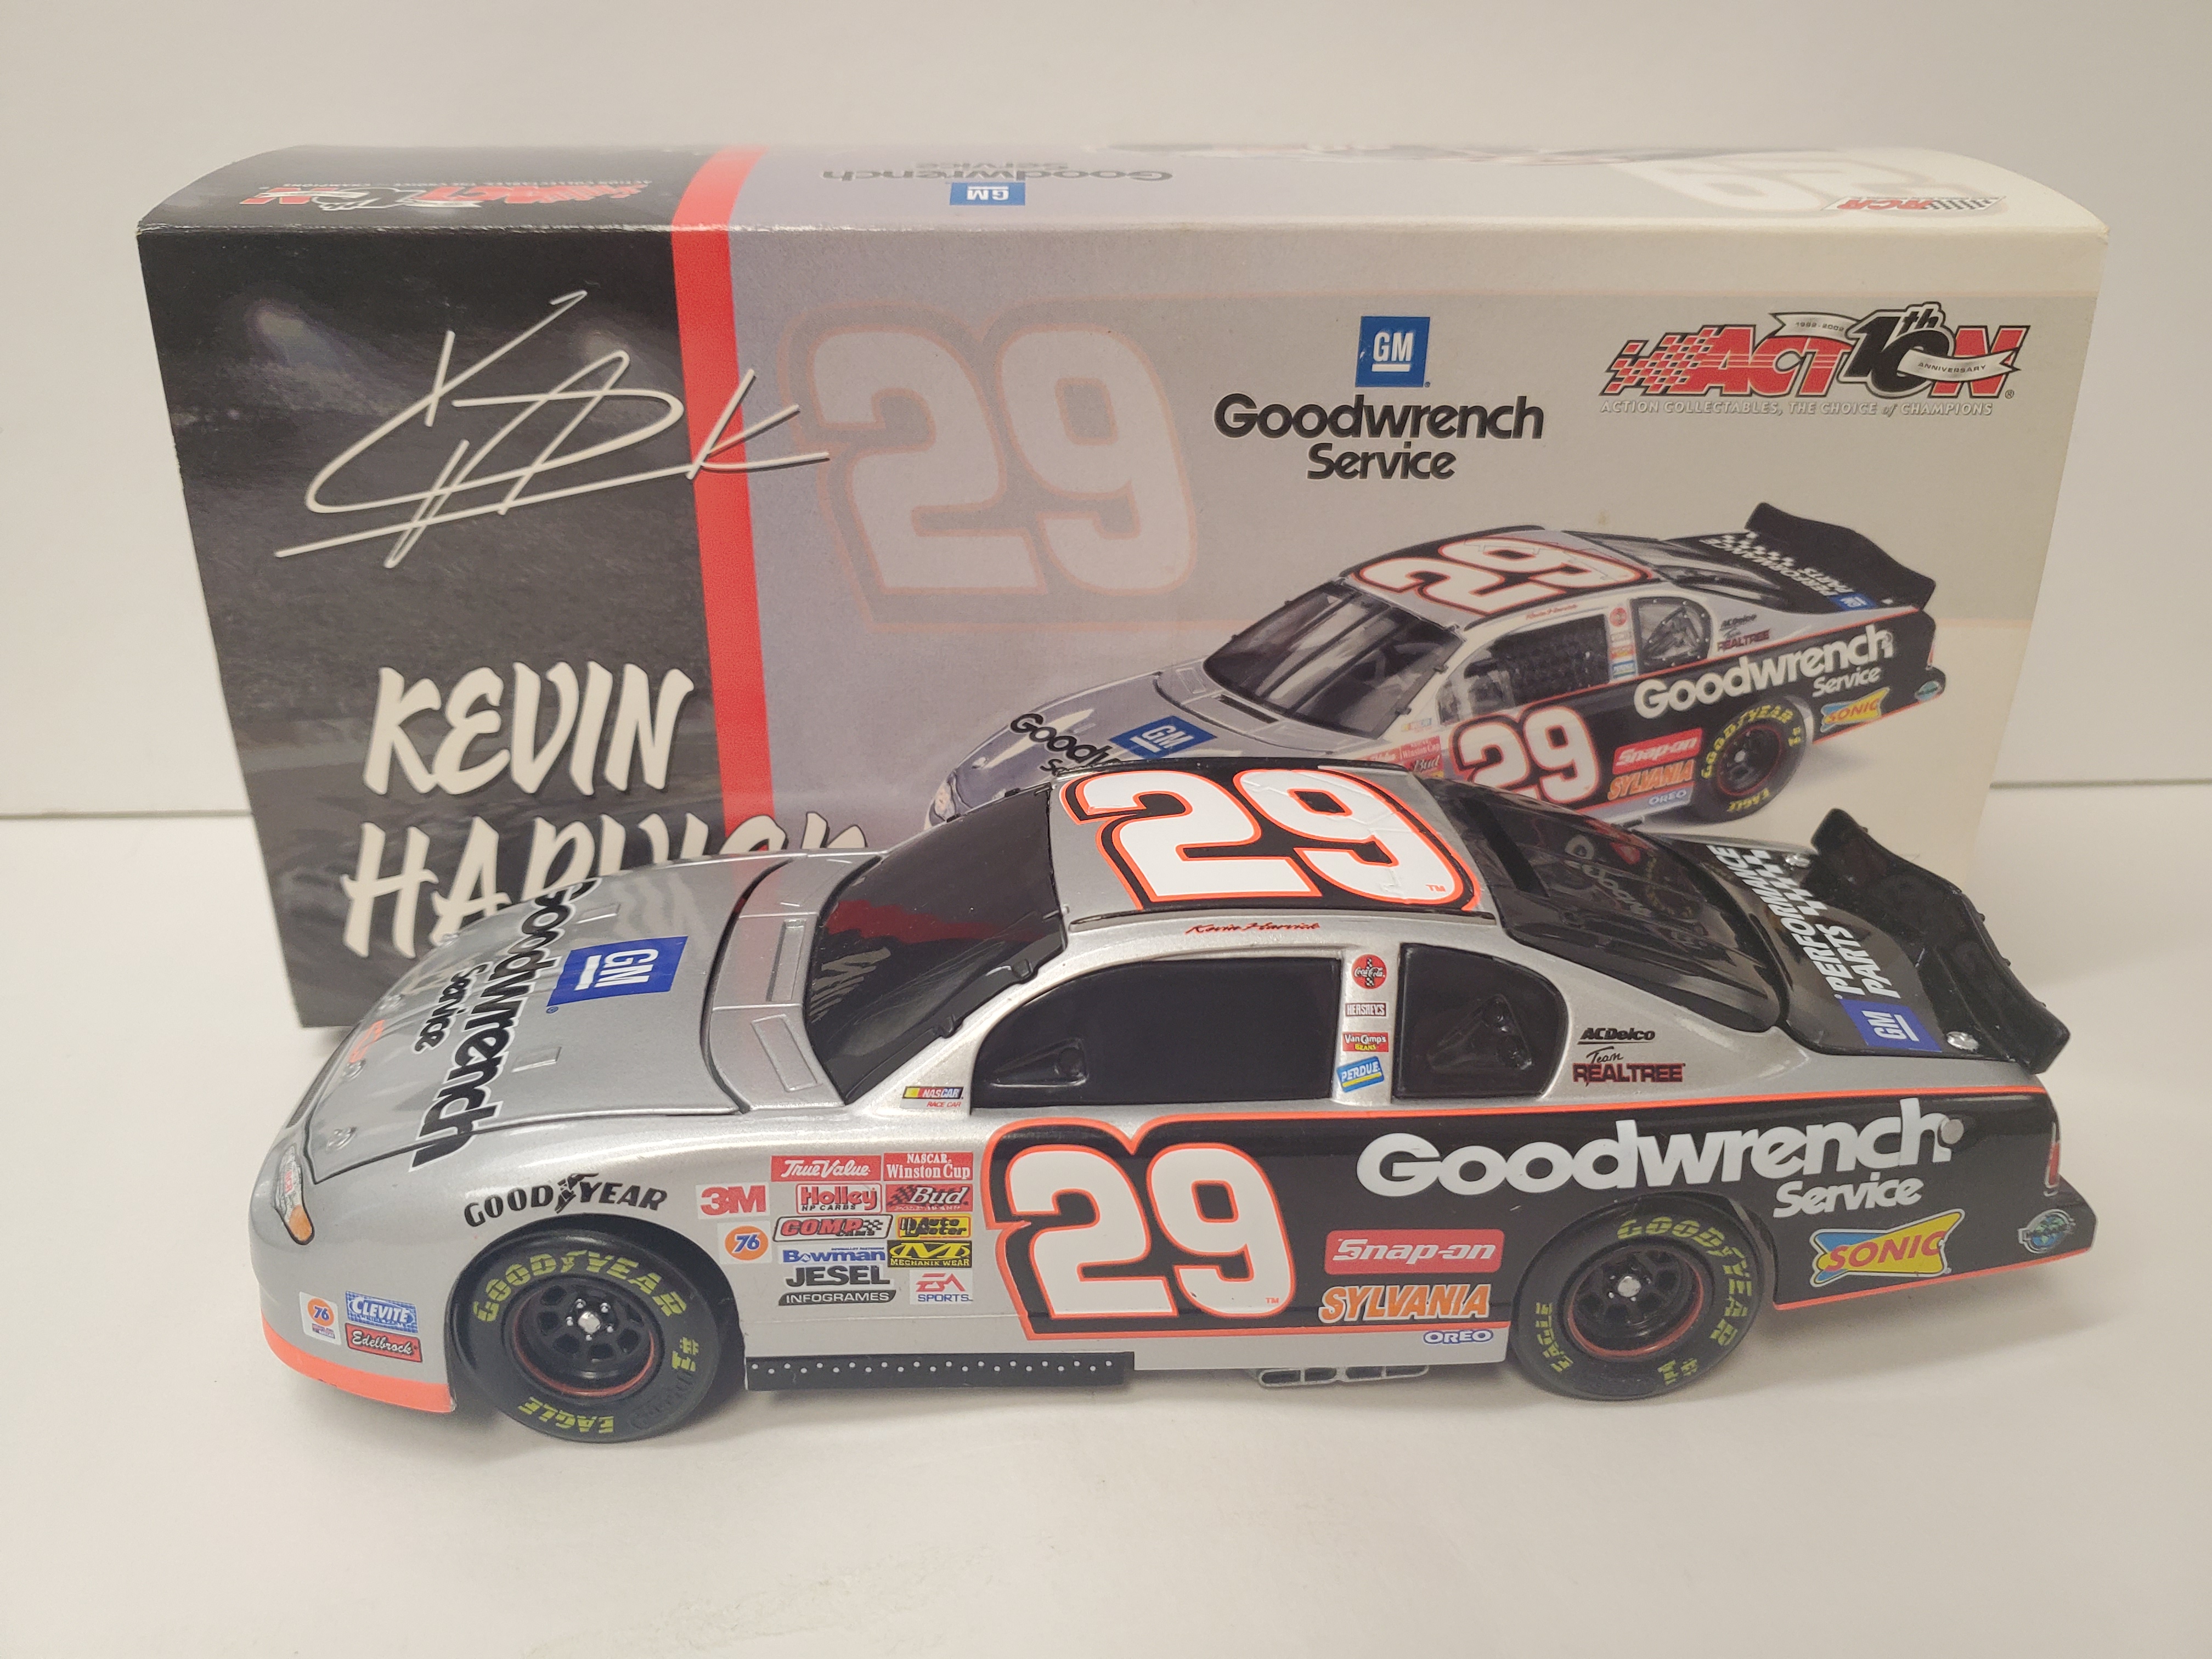 KEVIN HARVICK #29 GM GOODWRENCH SERVICE 2002 MONTE CARLO ACTION NASCAR 1/64 